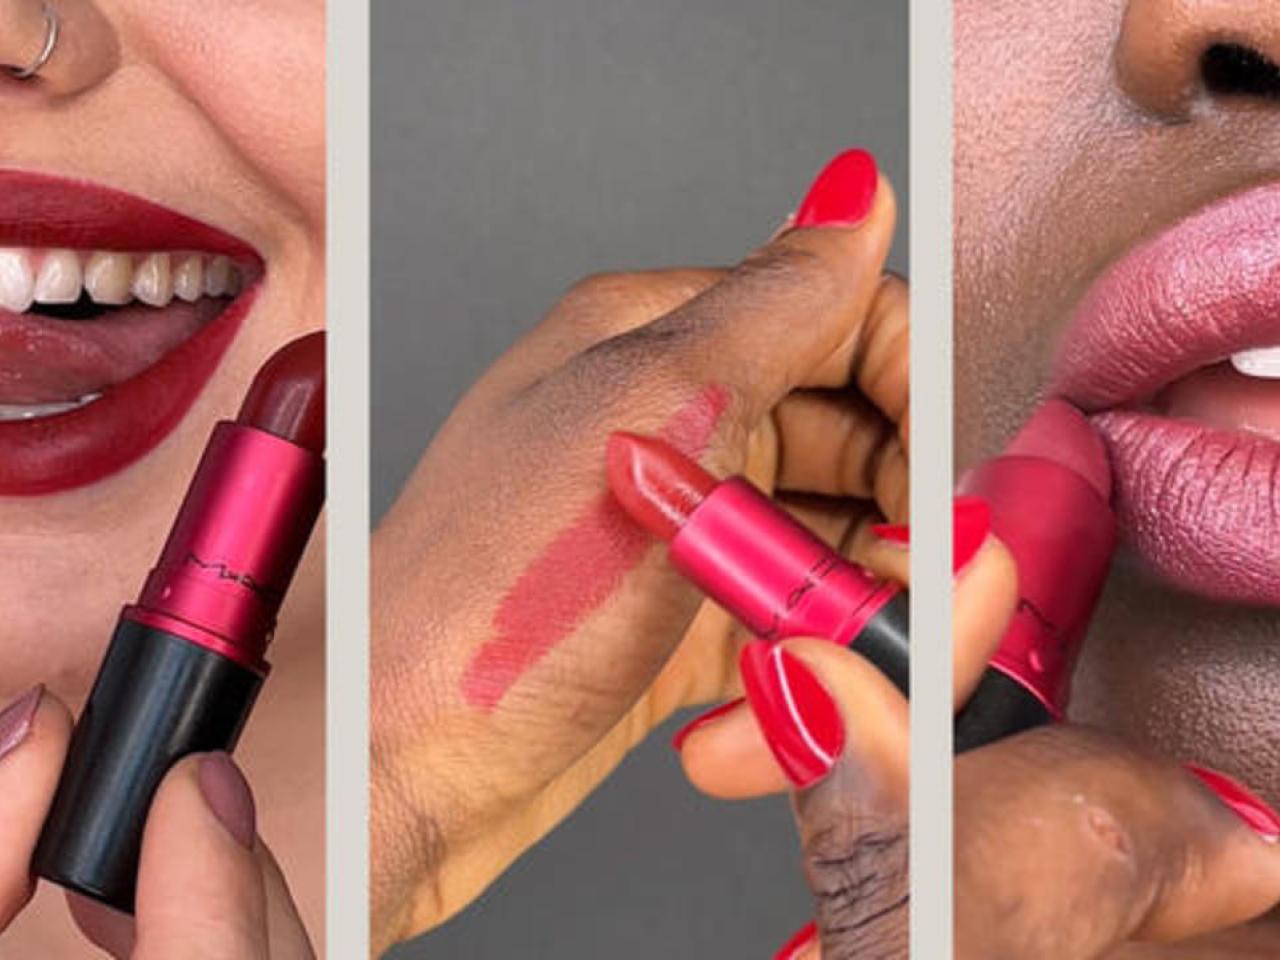 Three images of lipsticks being applied to lips and swatched on a hand.